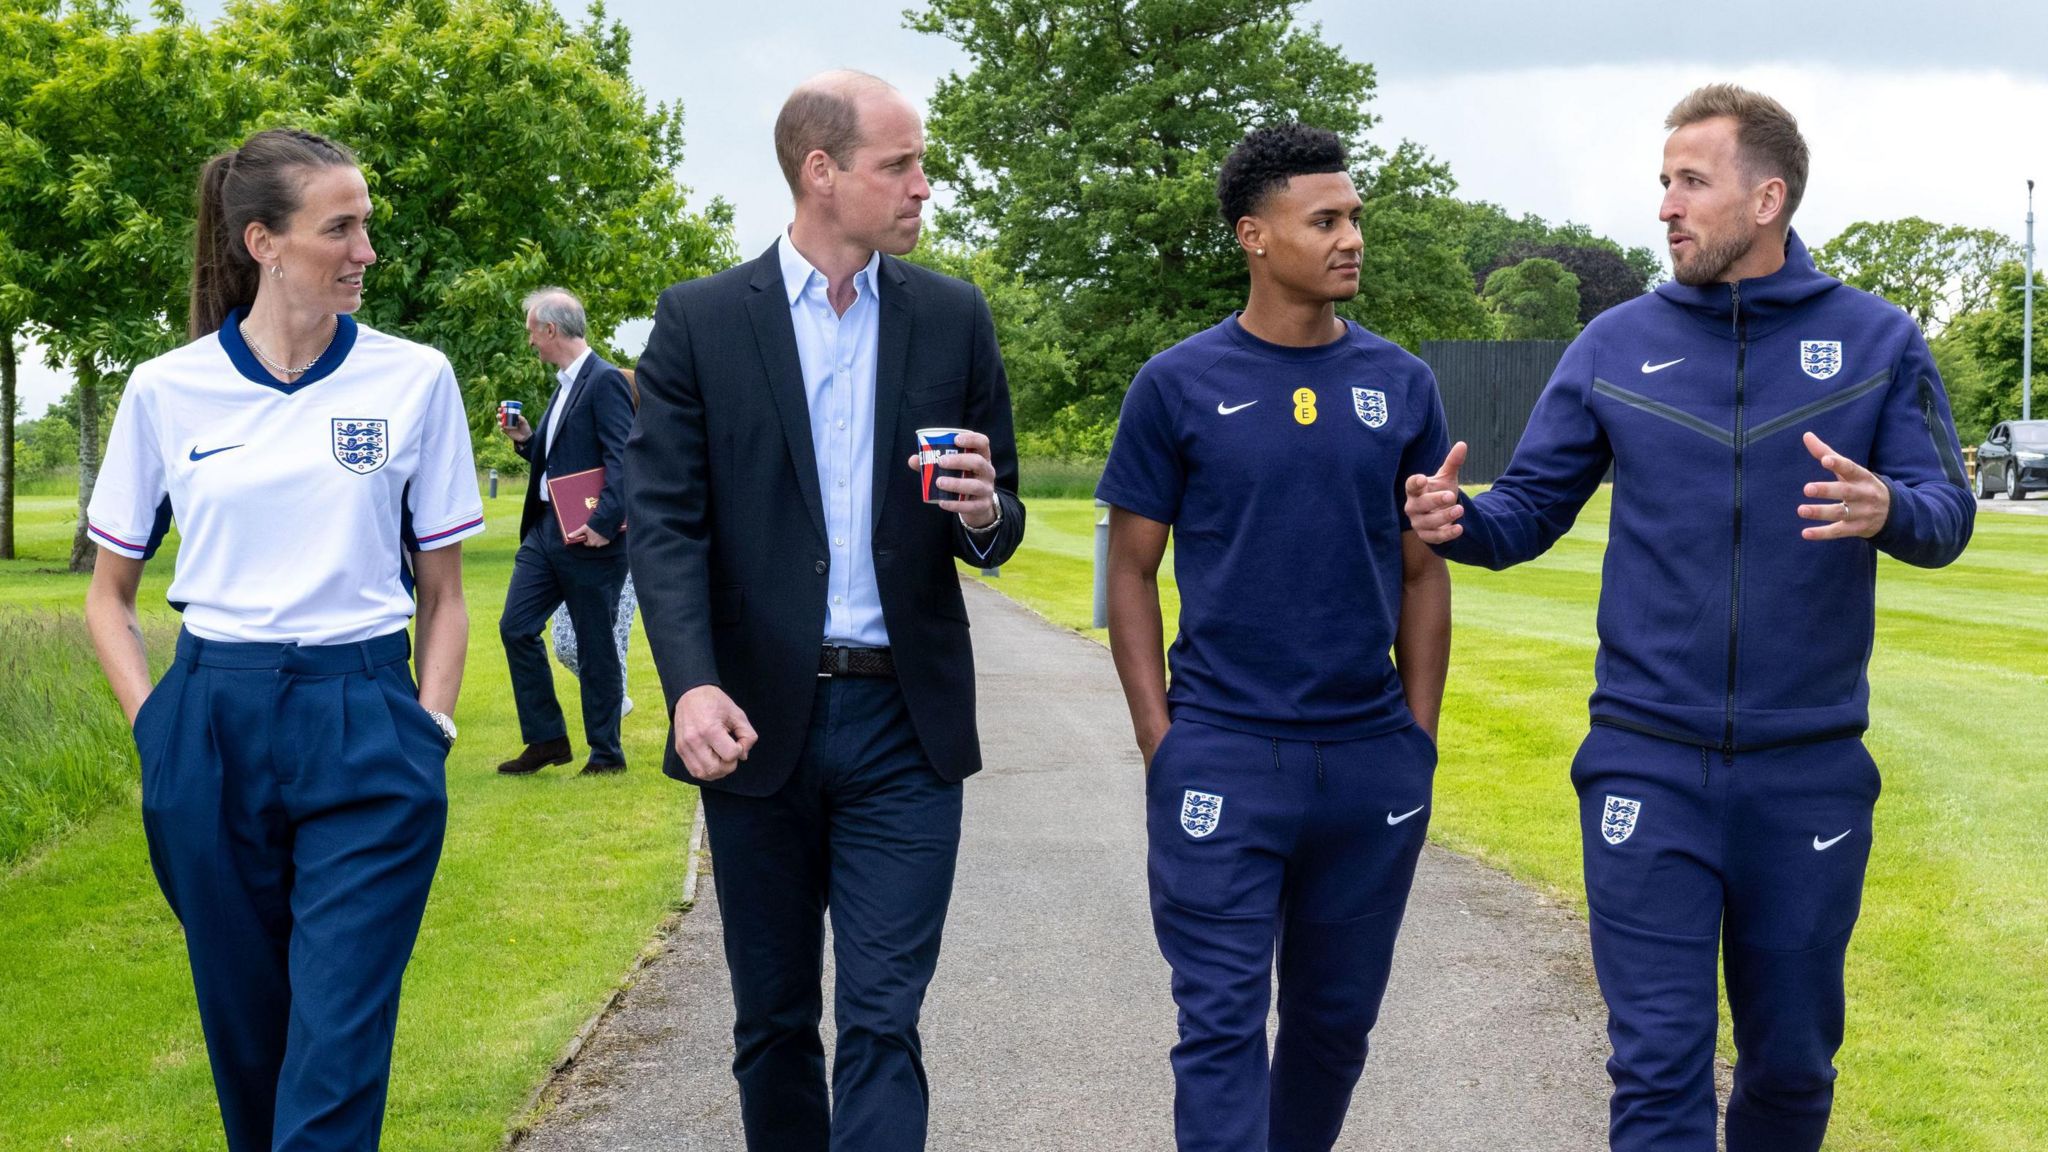 Prince William (second left) walks at St George's Park with Jill Scott, Ollie Watkins and Harry Kane